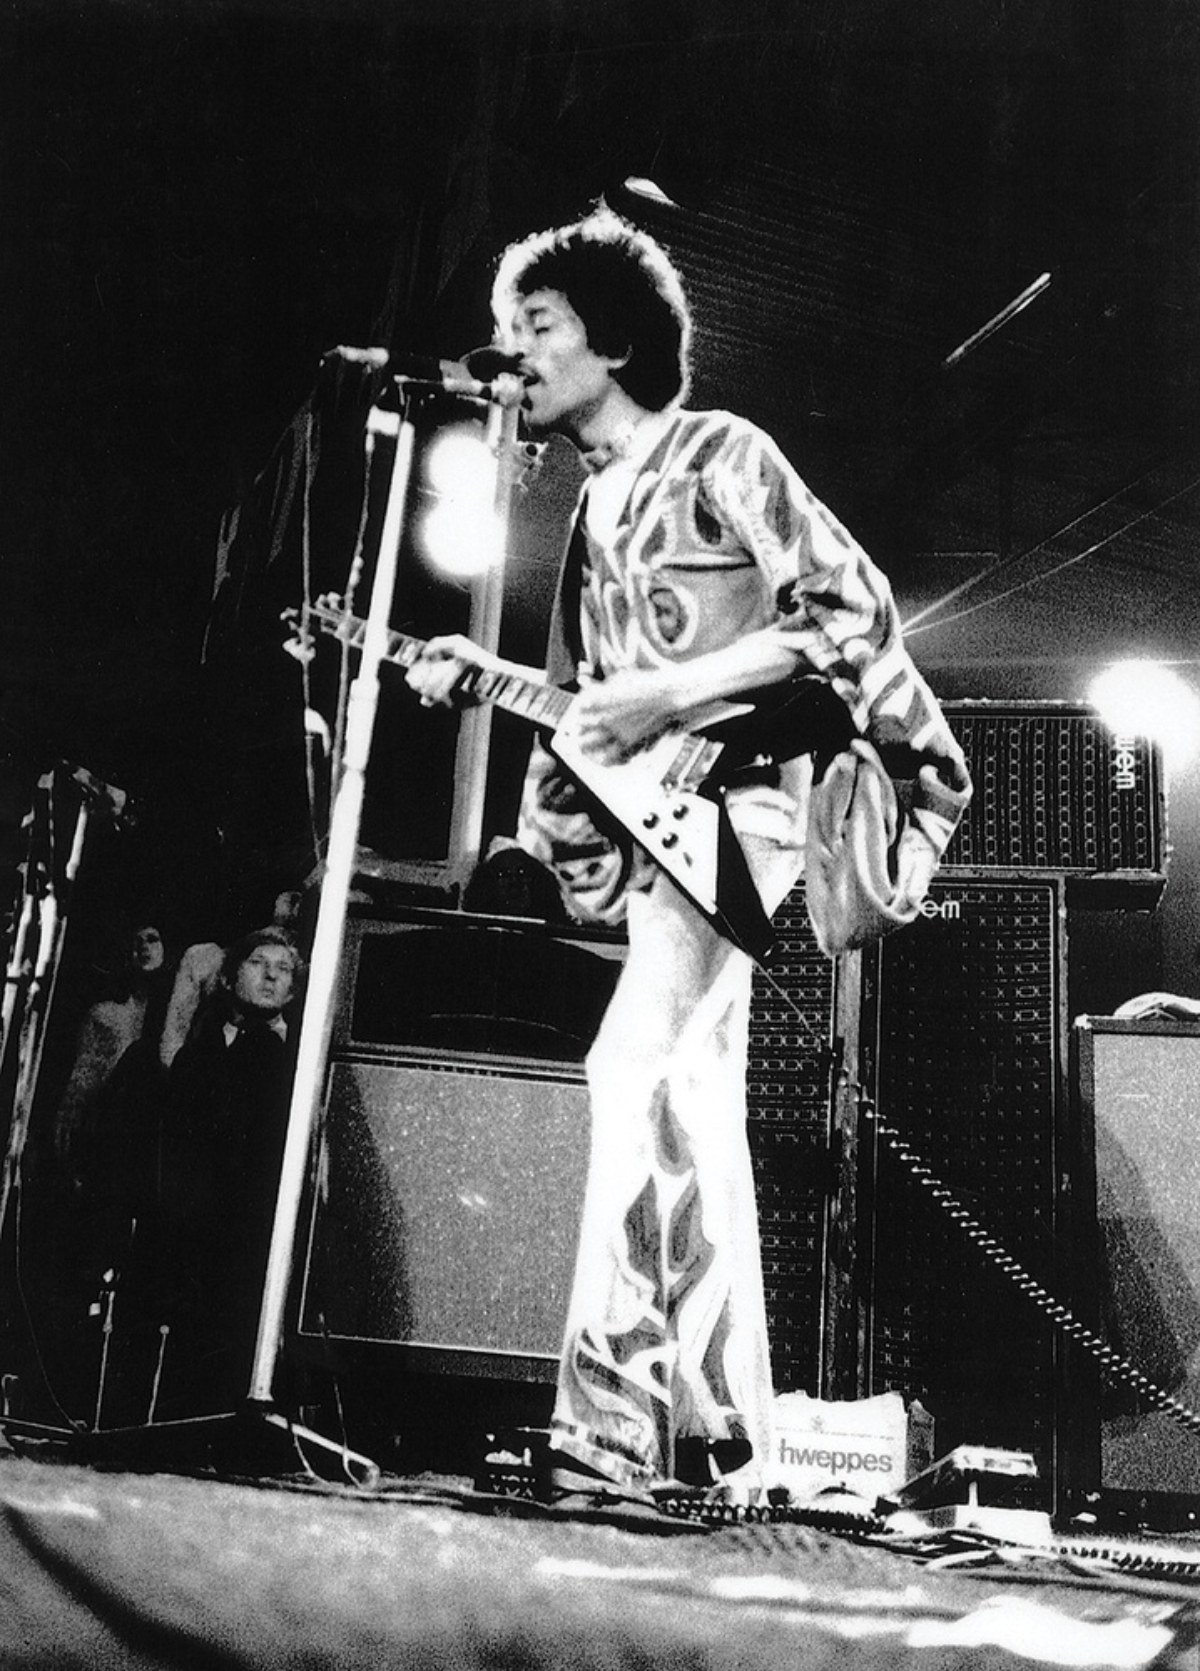 Jimi Hendrix at the Isle of Wight Festival in 1970